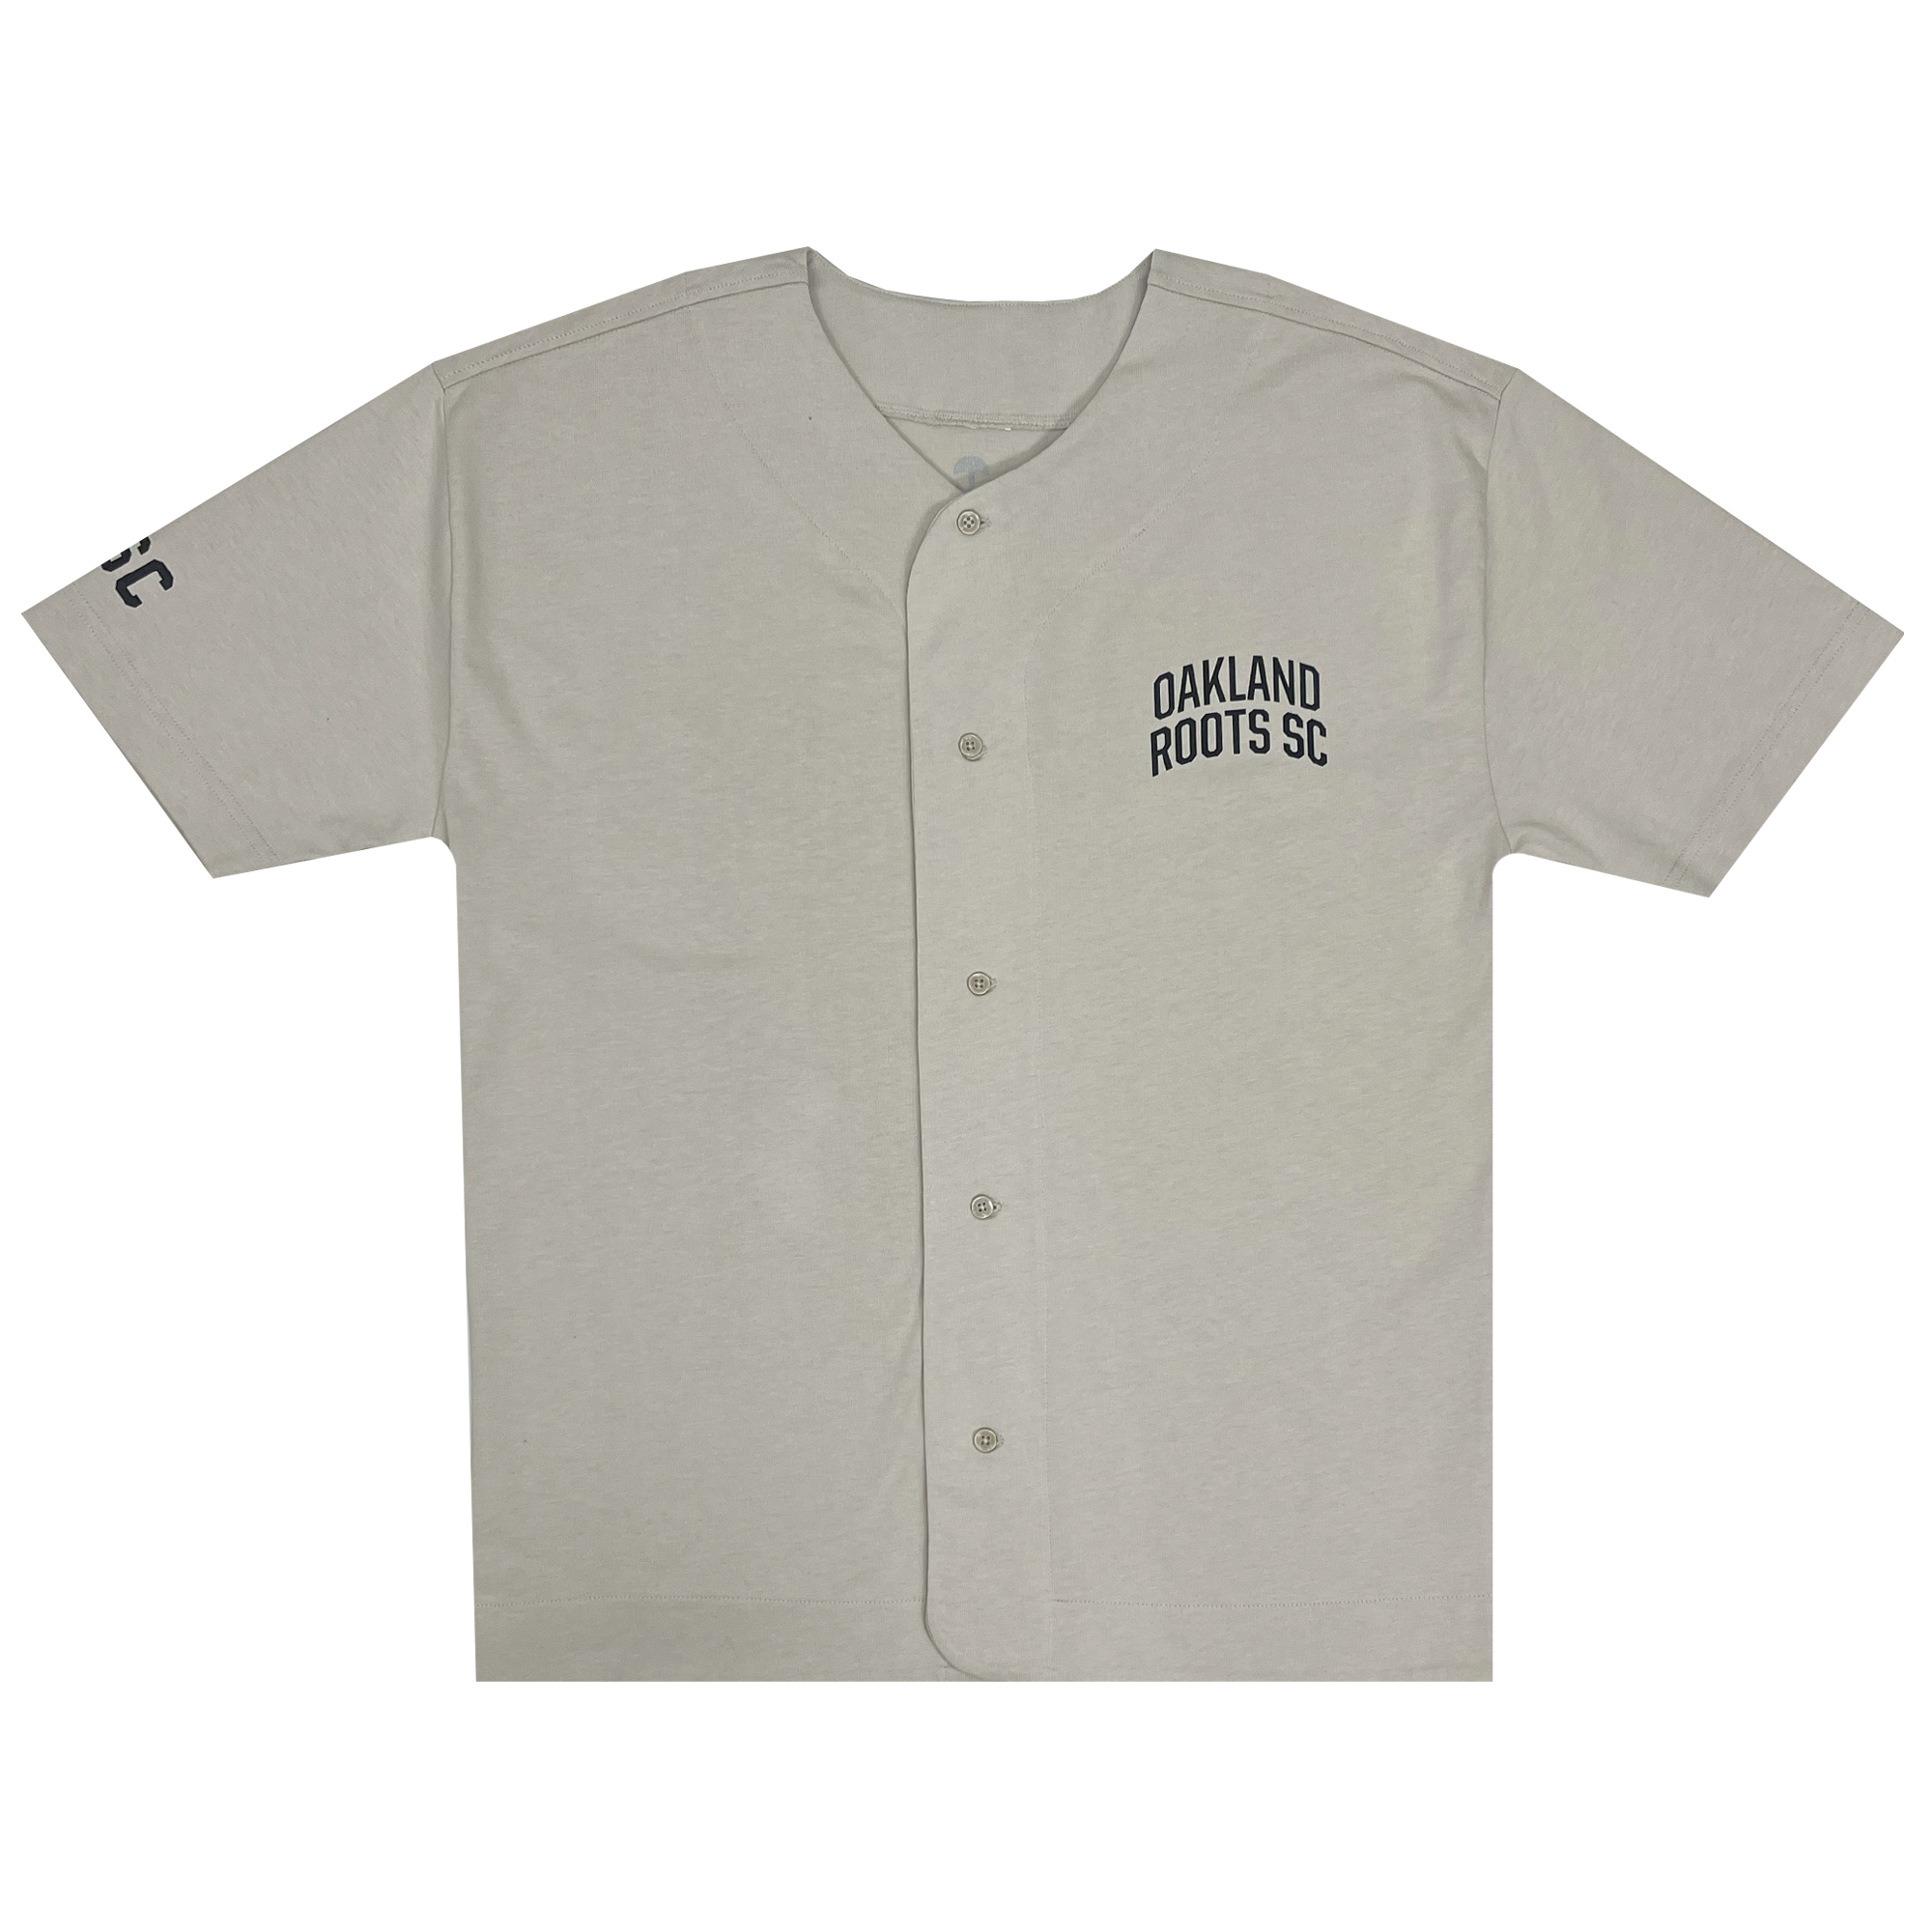 Bone-colored button-up baseball jersey with black OAKLAND ROOTS SC wordmark on the left chest.